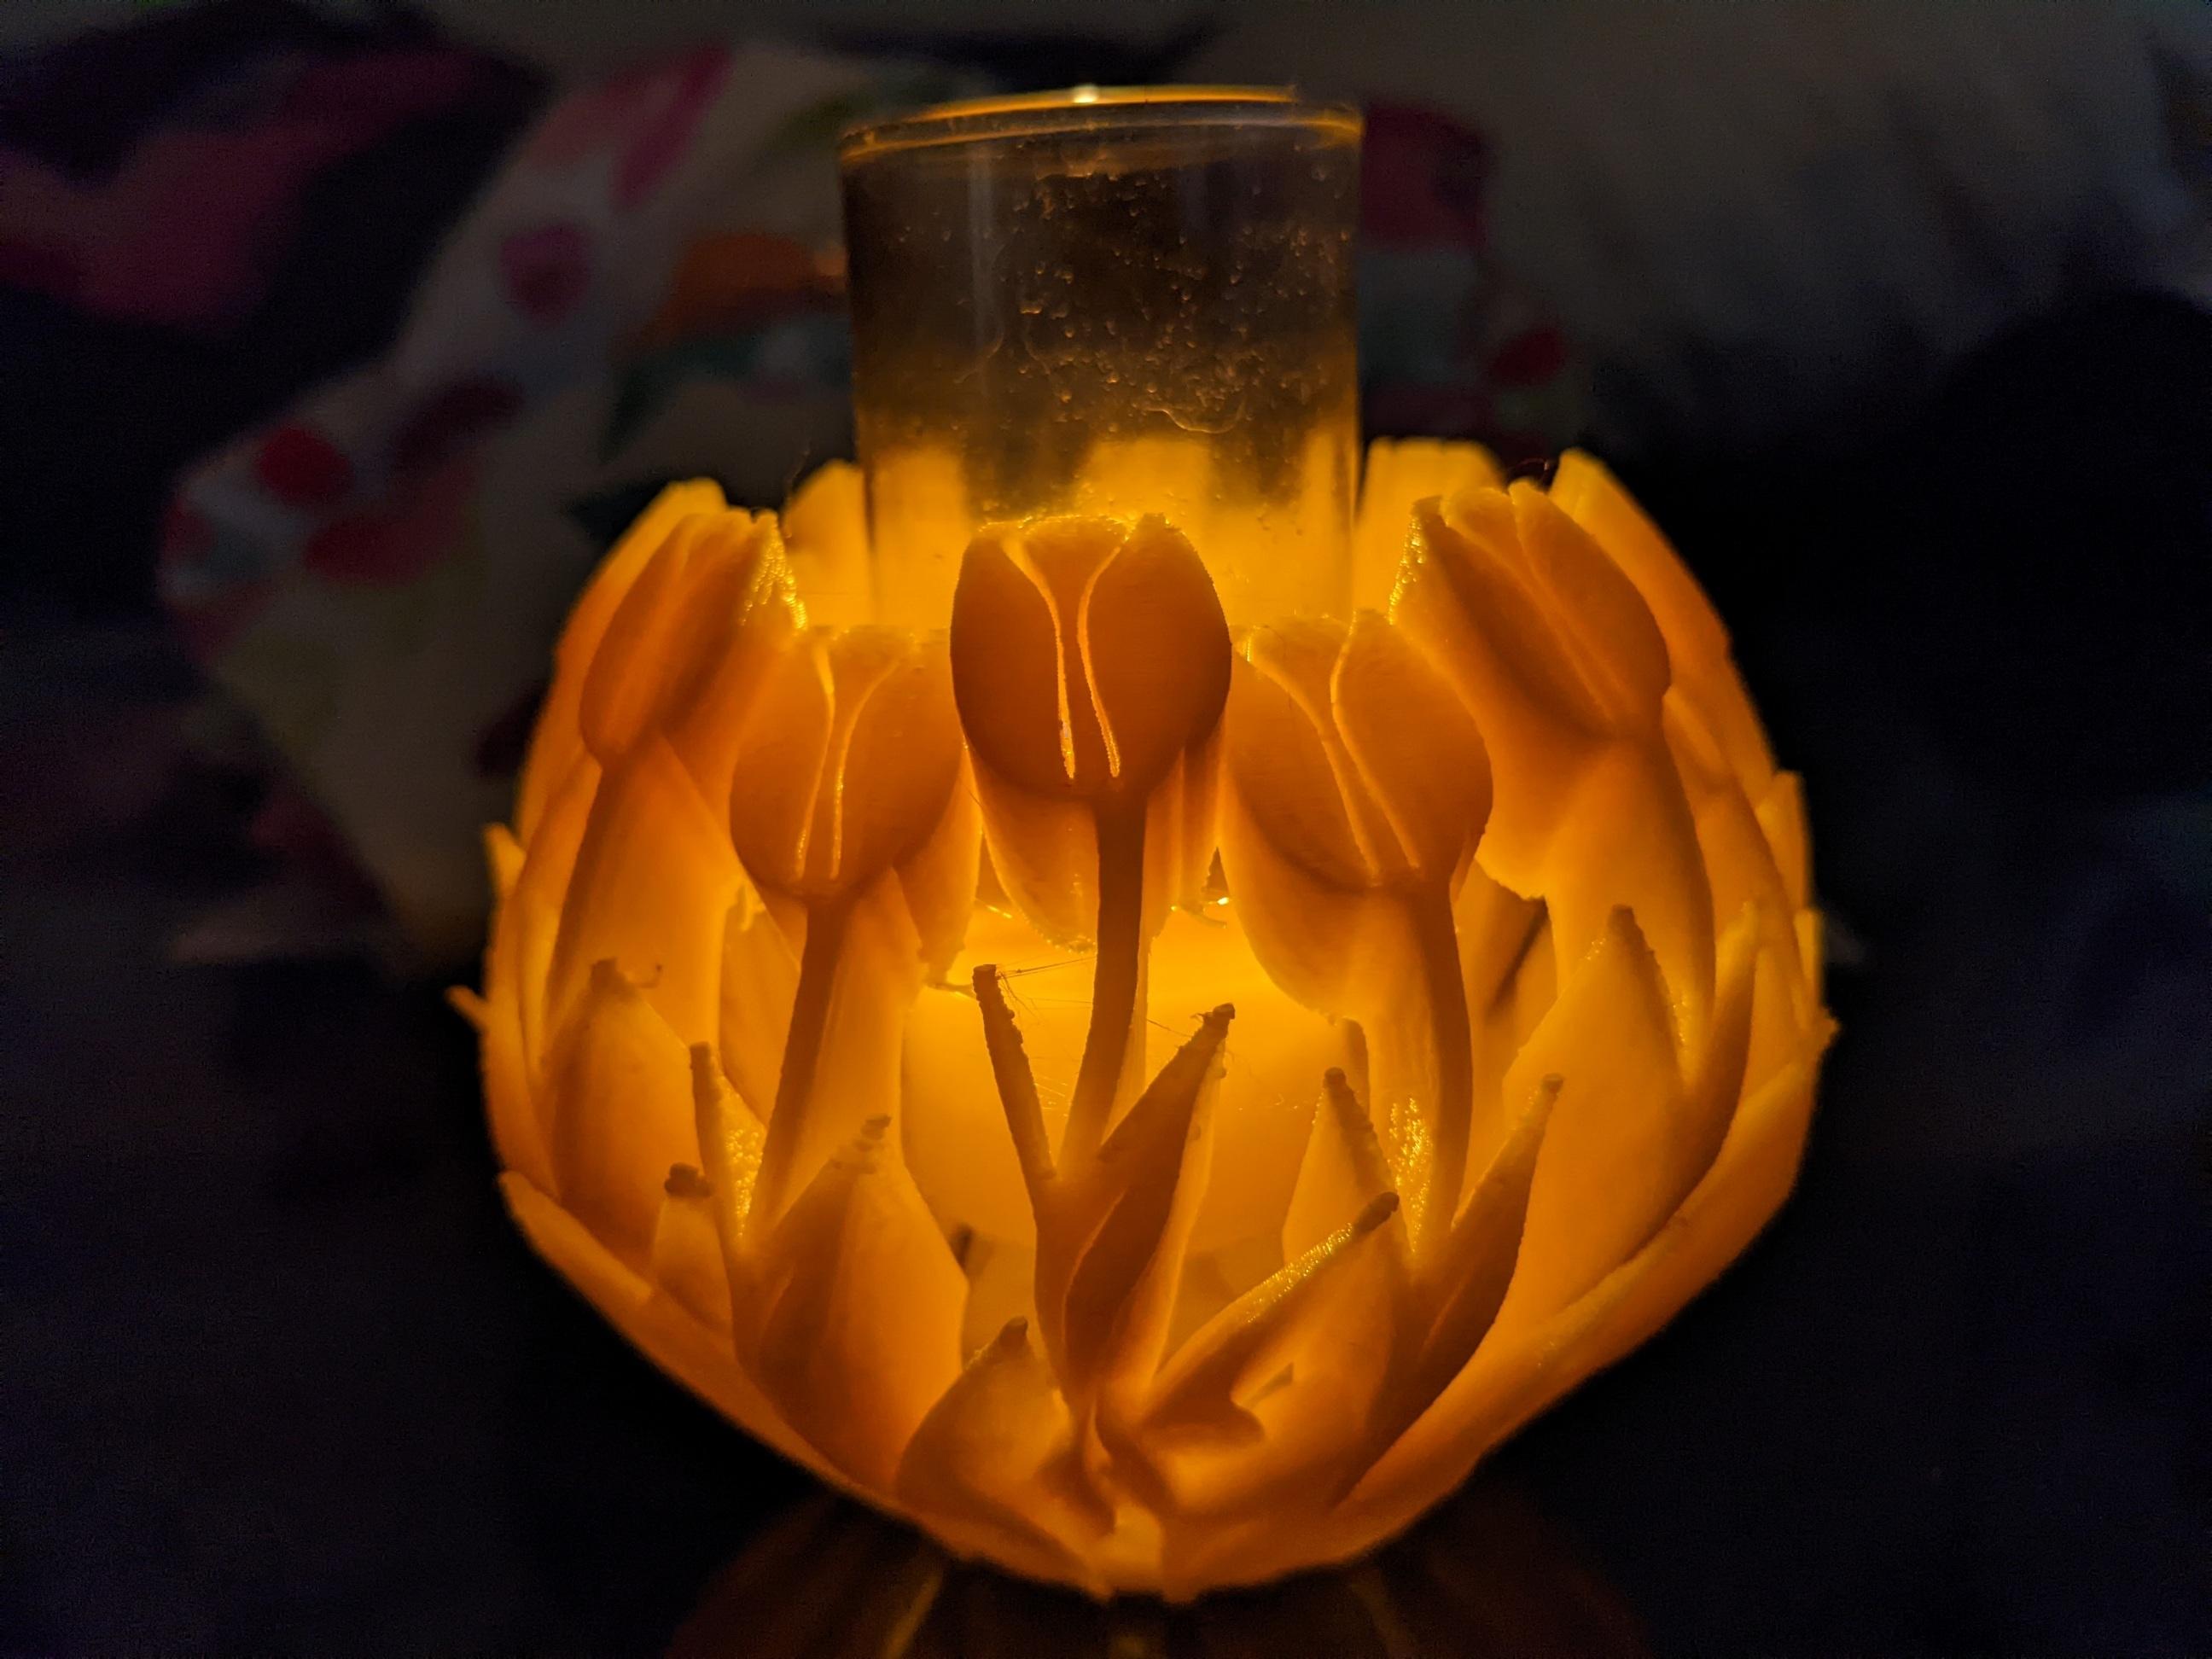 Spring Tulip Bowl - In the center of this Matterhackers Yellow PLA Sprint Tulip Bowl is a tall slender candle. I didnt want one that was any lower than the model because PLA melts so easily. Although the candle could be a little shorter. - 3d model